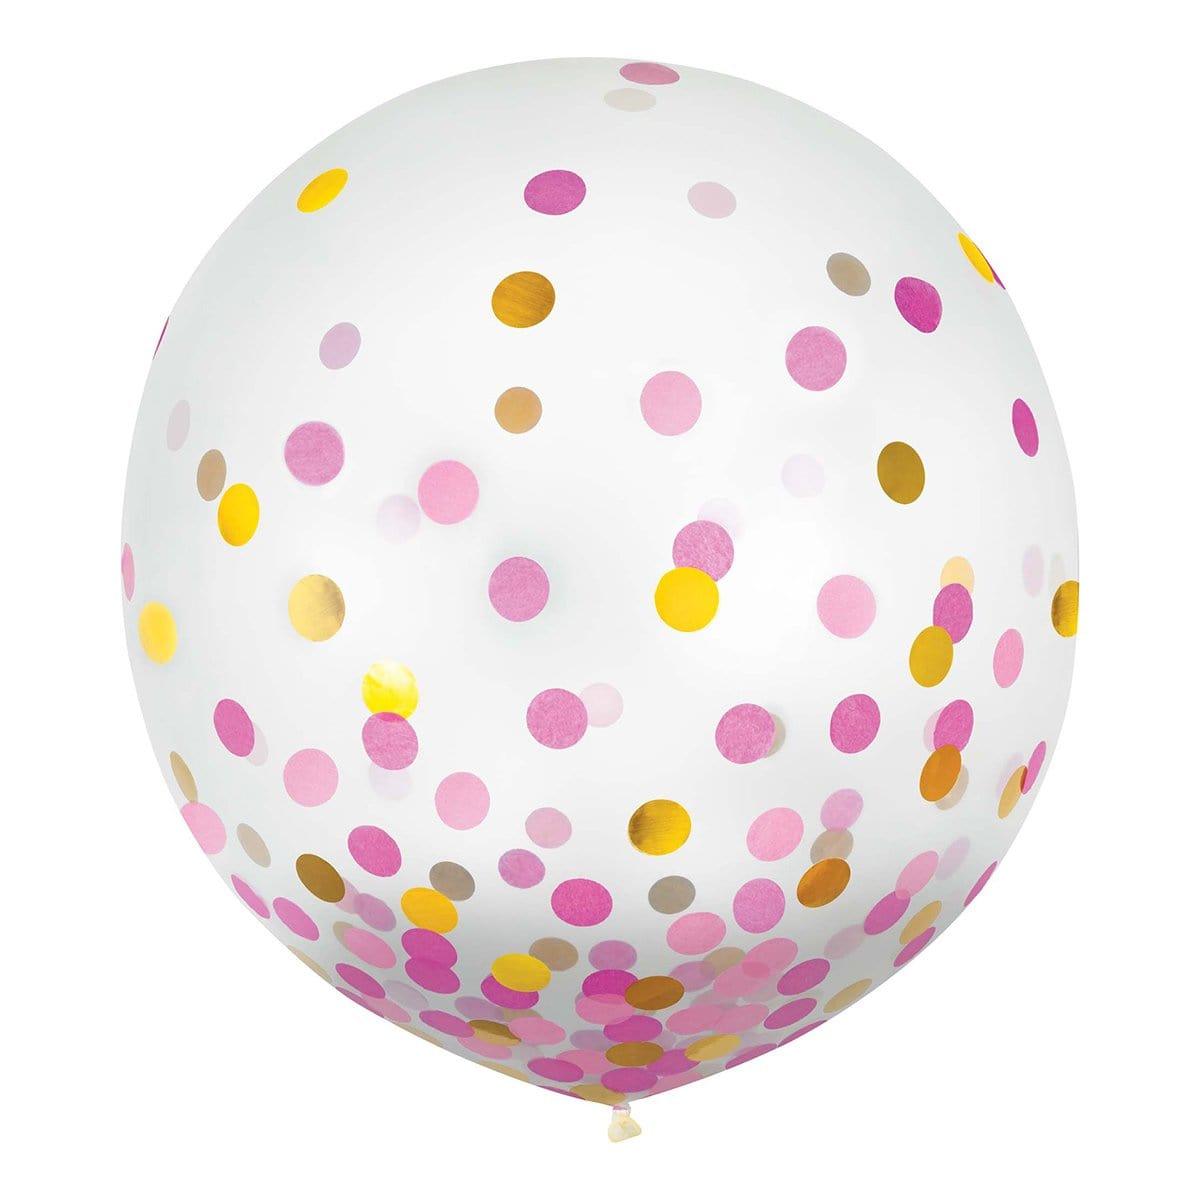 Buy Balloons Latex Balloons With Pink and Gold Confetti, 24 Inches, 2 Count sold at Party Expert